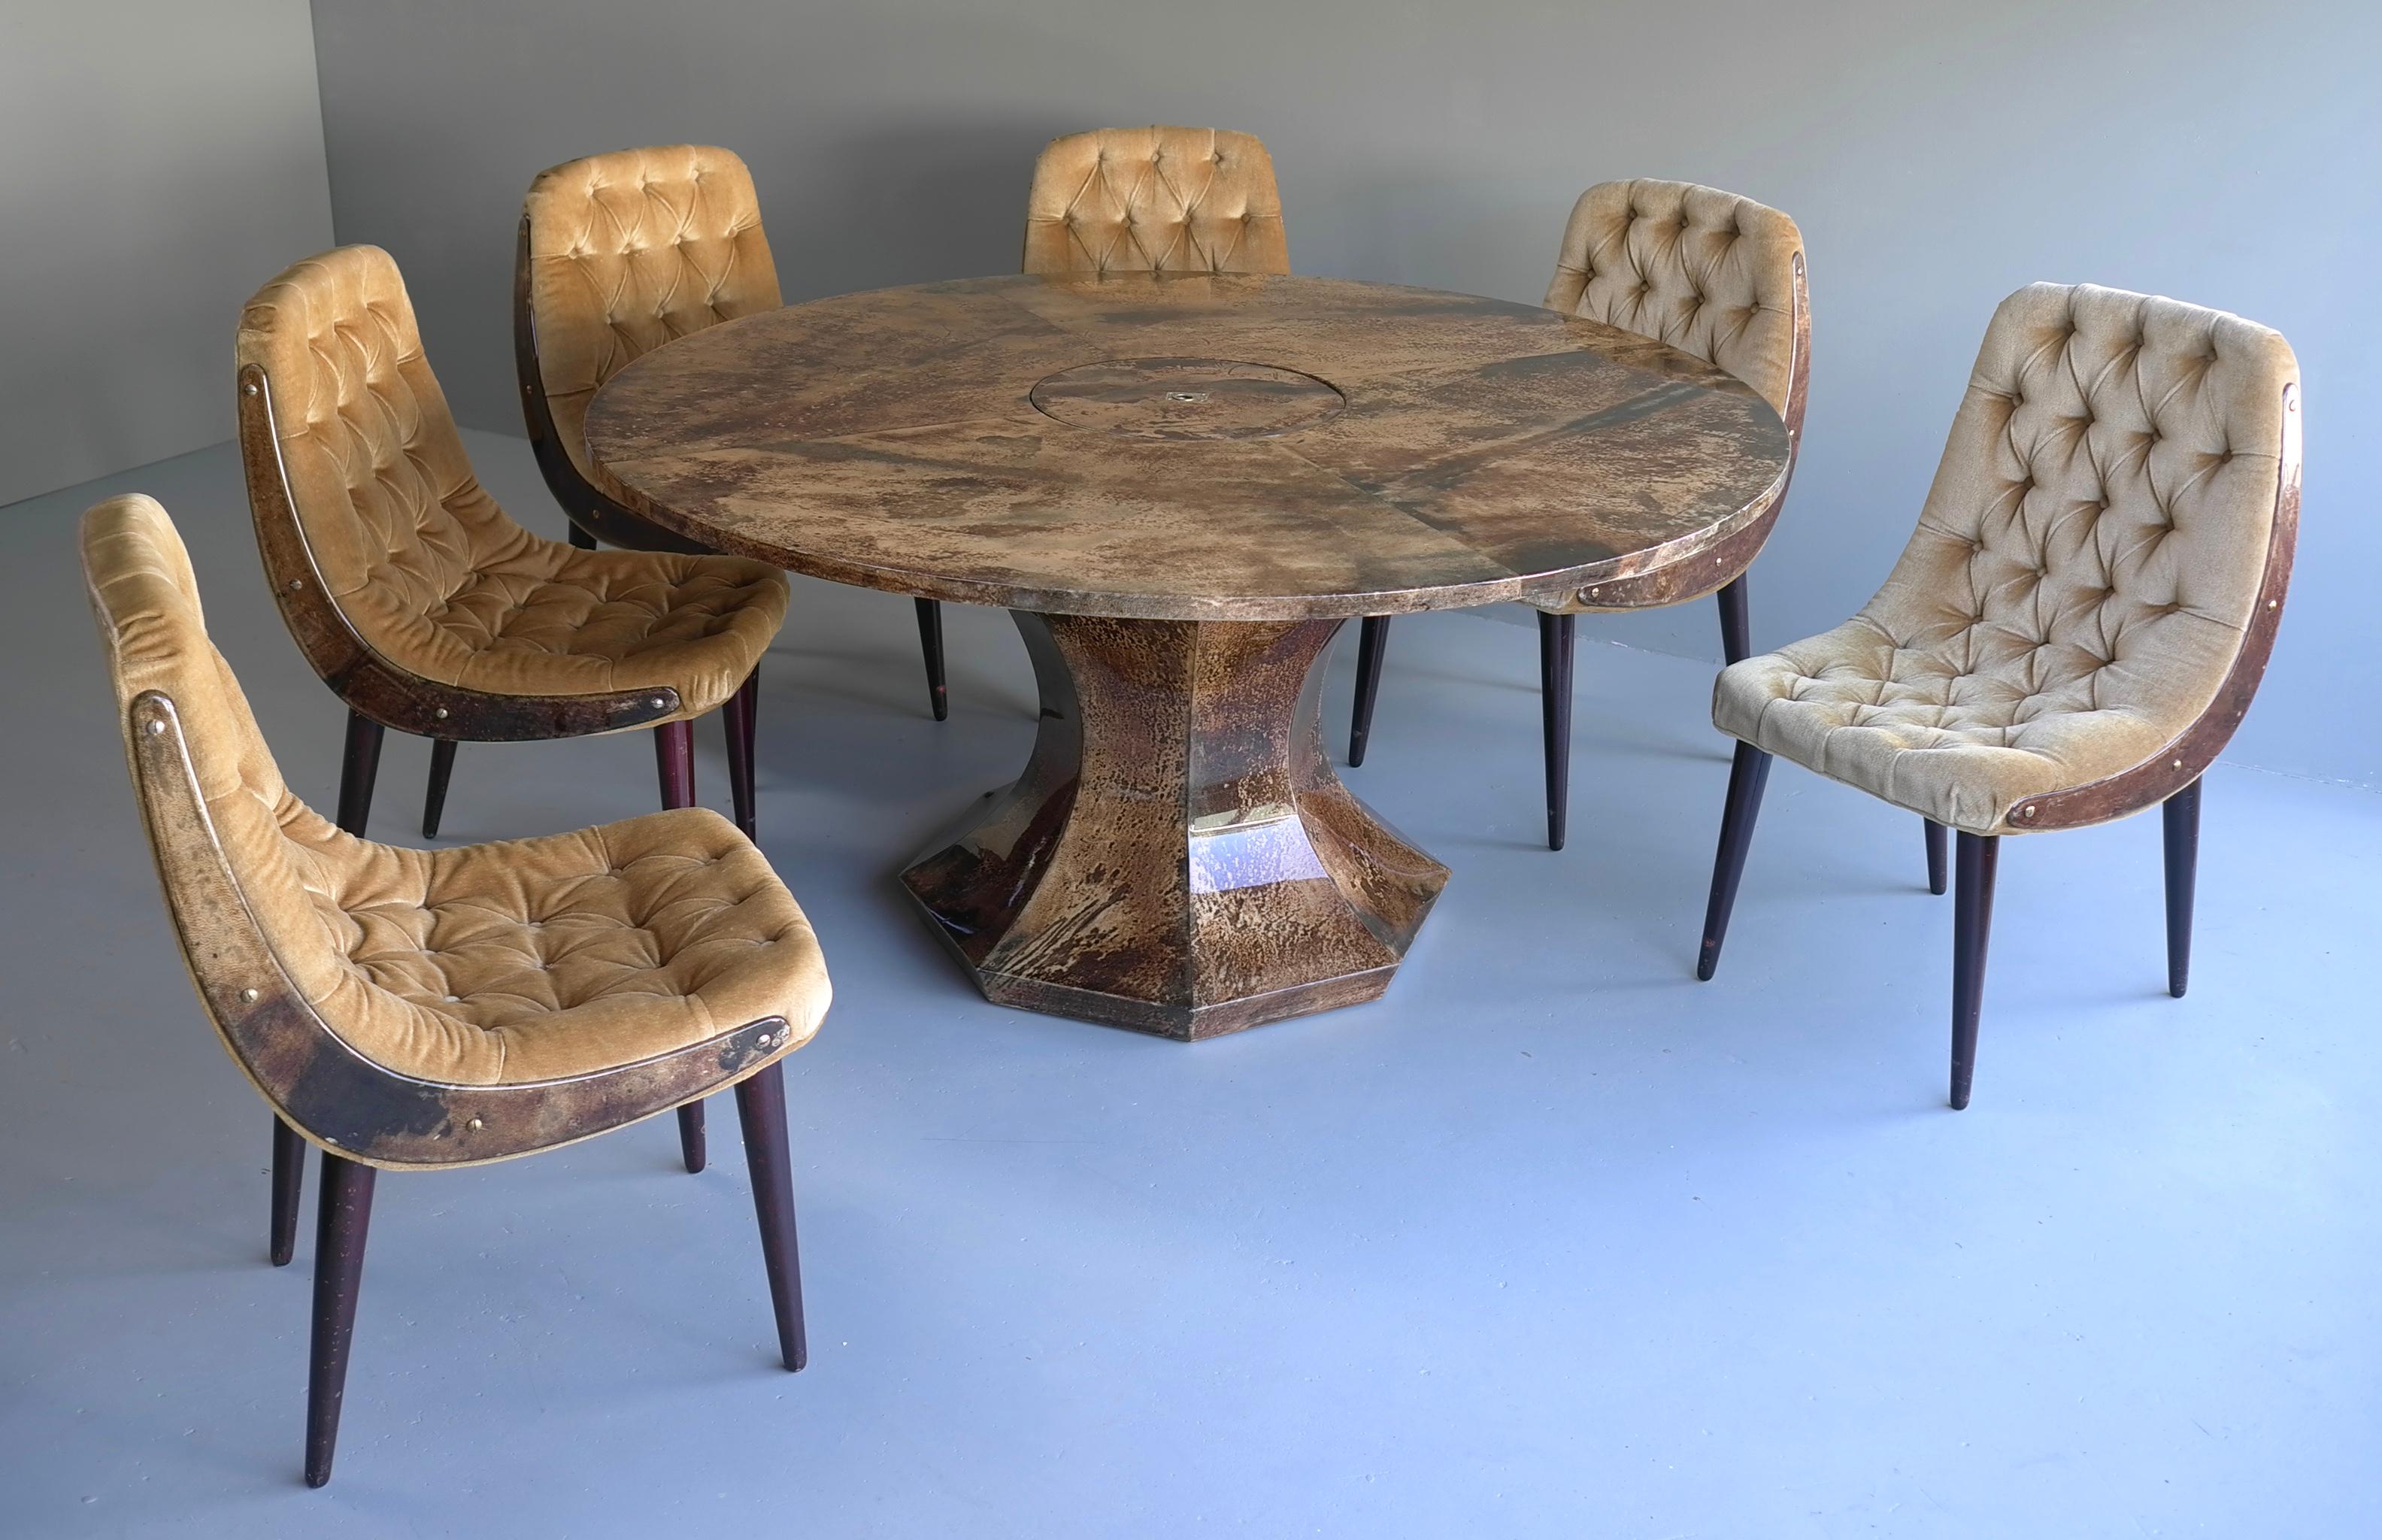 Aldo Tura Dining Set, Goatskin Parchment Table with 6 Velvet Chairs, Italy 1950s For Sale 5